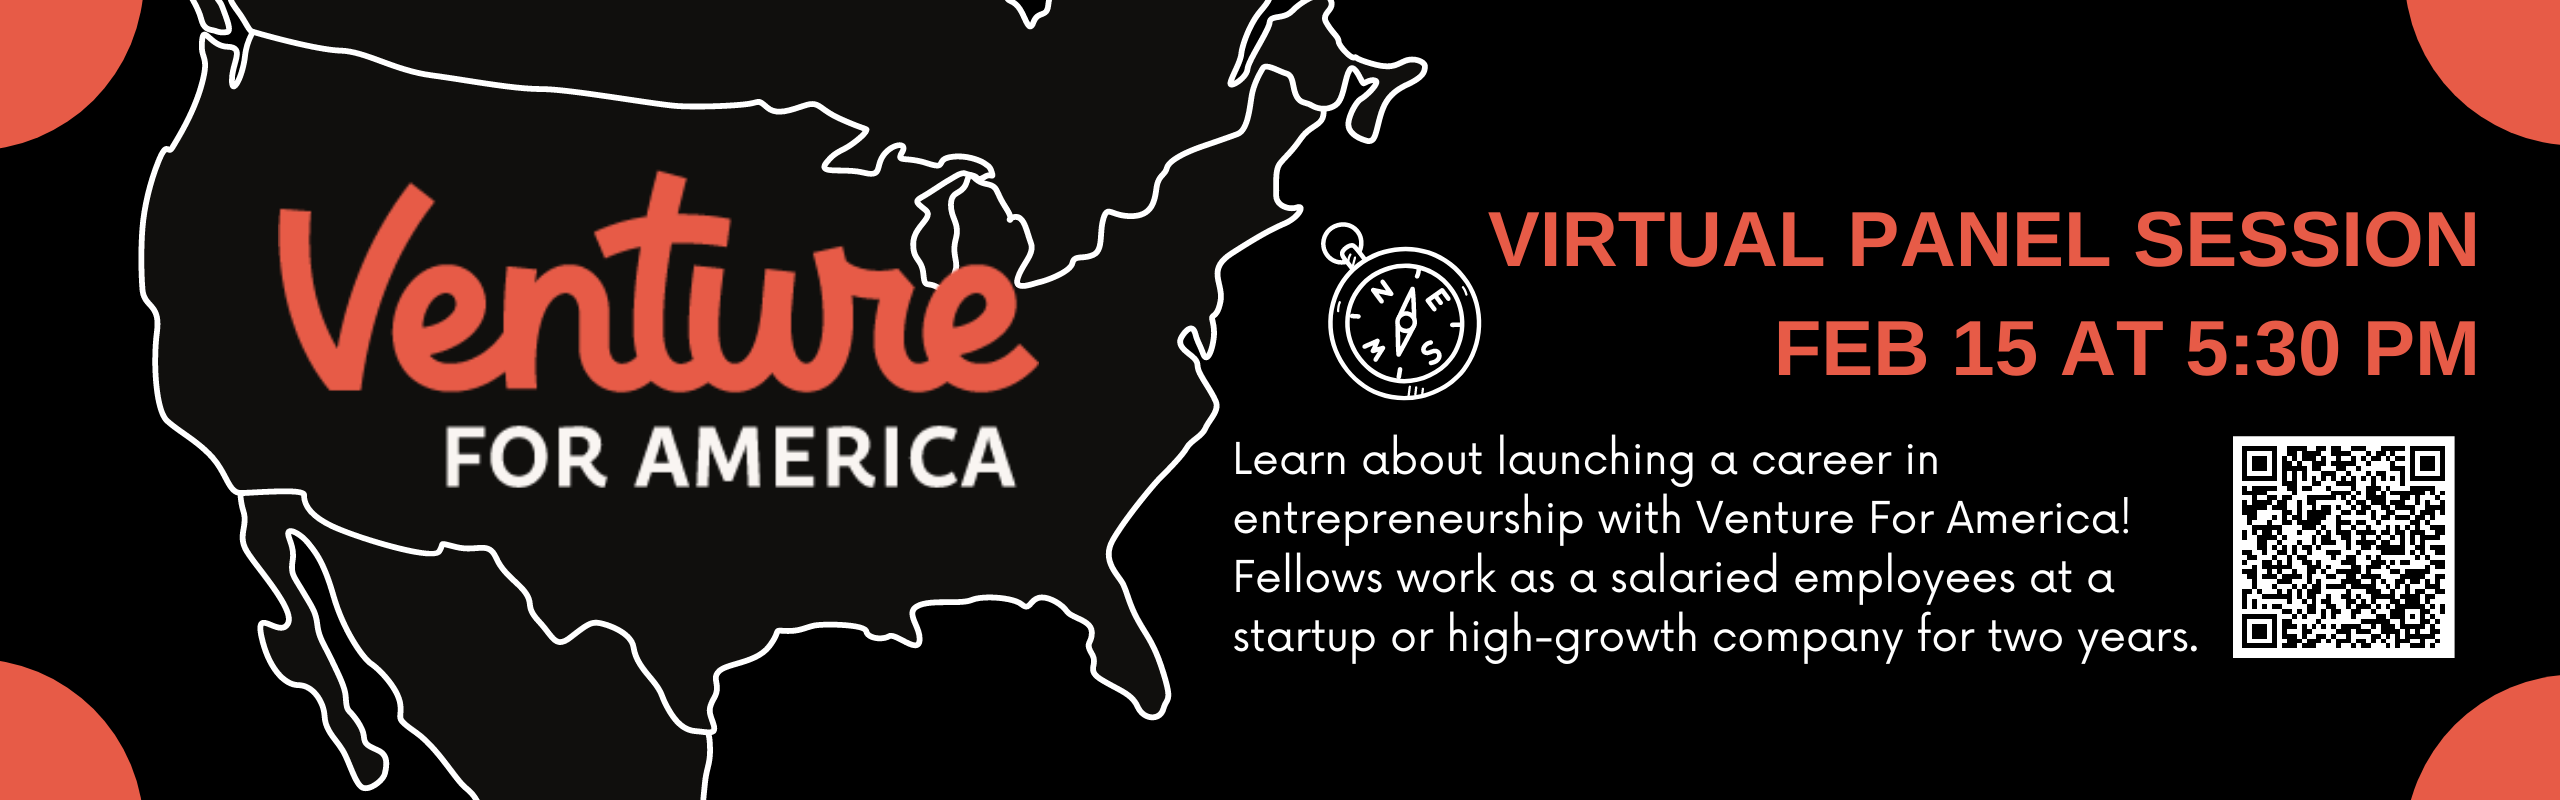 Venture for America Virtual panel session Feb 15 review the Elon Job Network for details